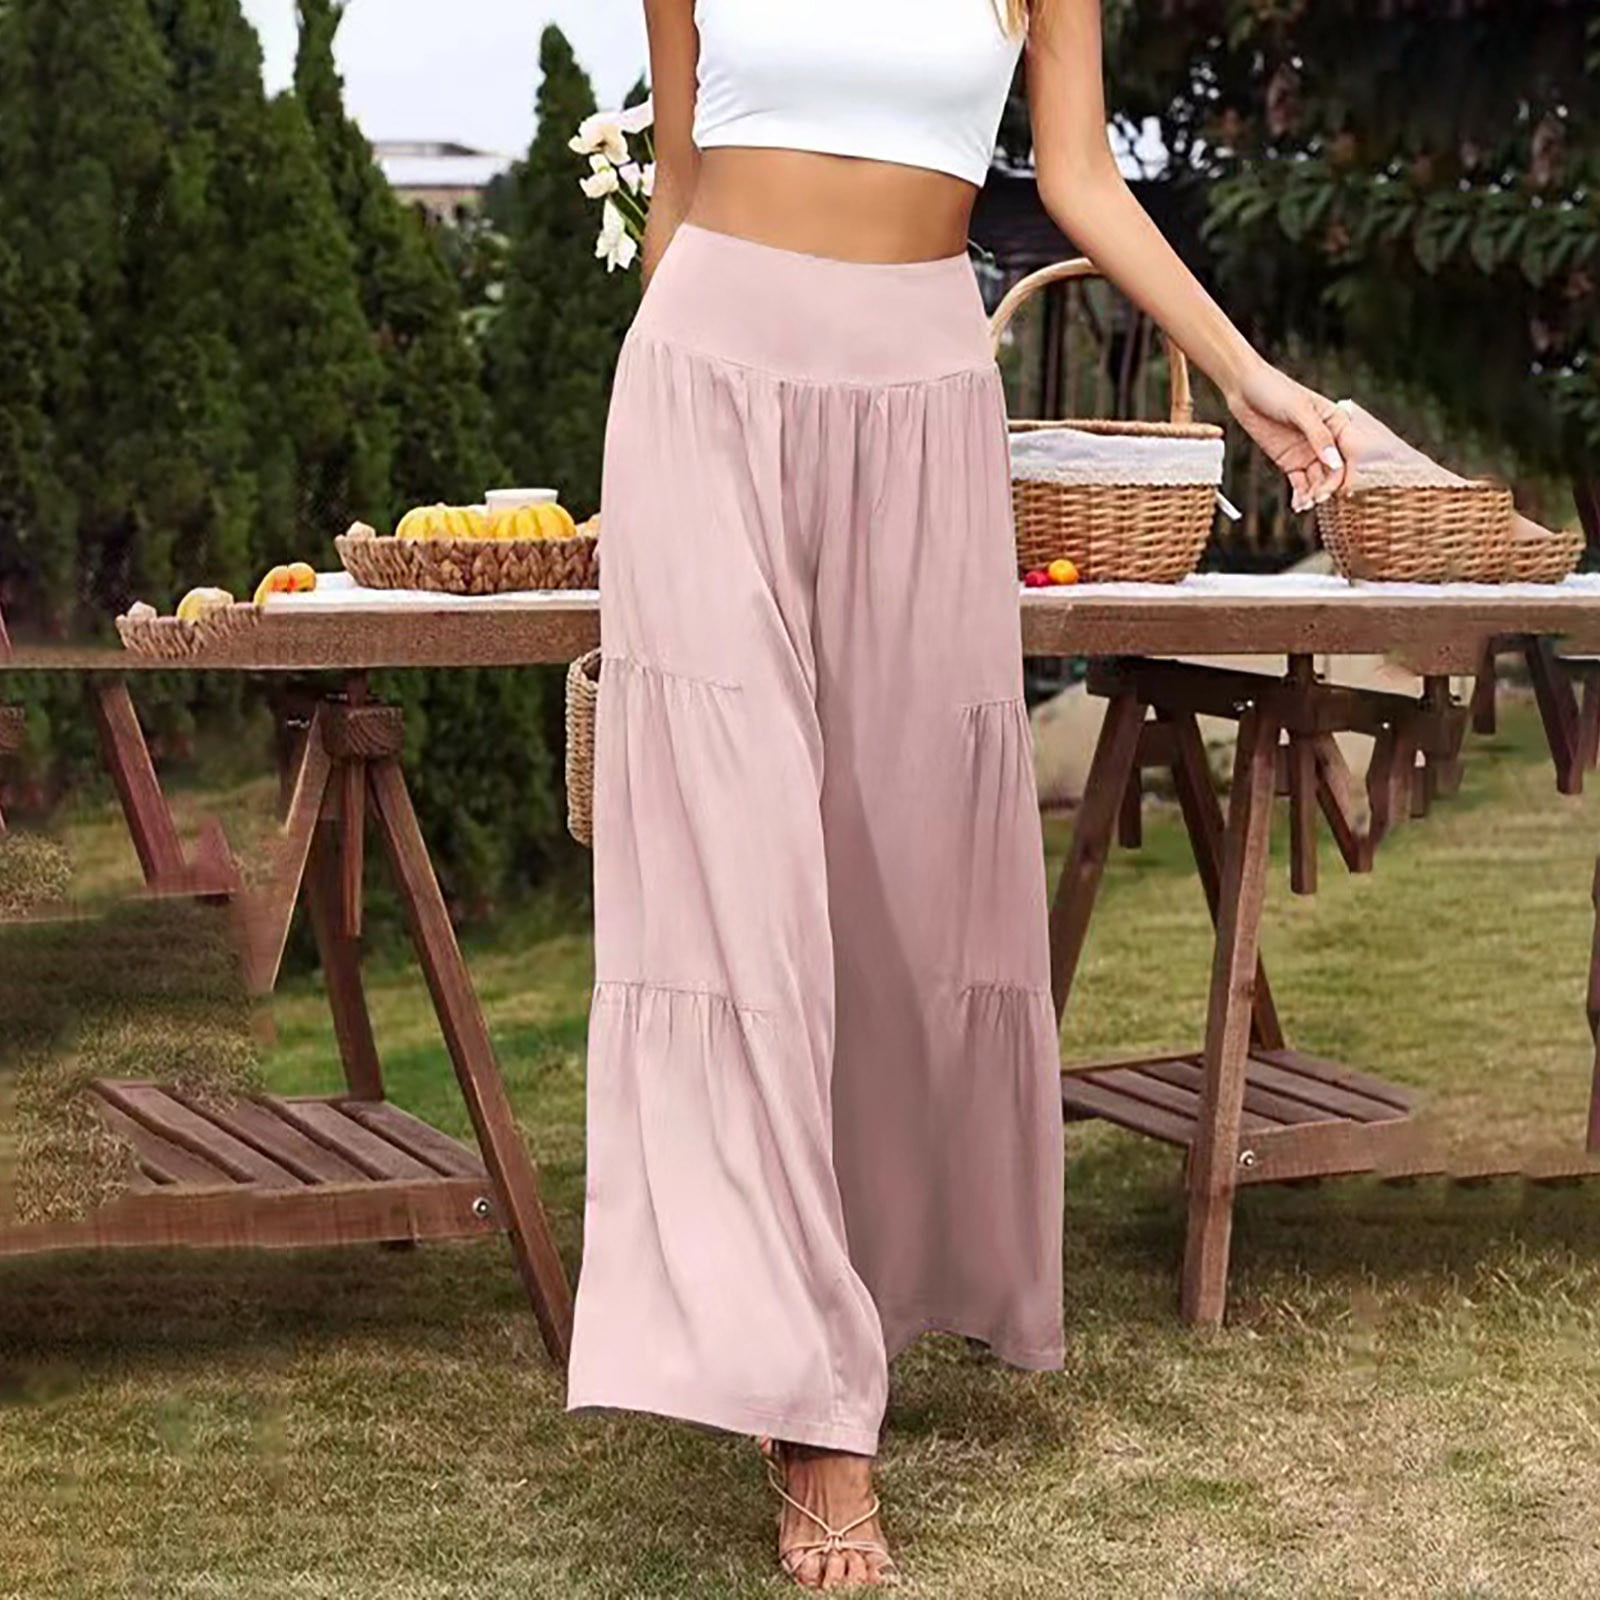 Kayannuo Wide Leg Pants for Women Christmas Clearance Women's Fashion  Casual High Waist Elastic Waist Solid Color Ruffle Wide Leg Long Pants Pink  